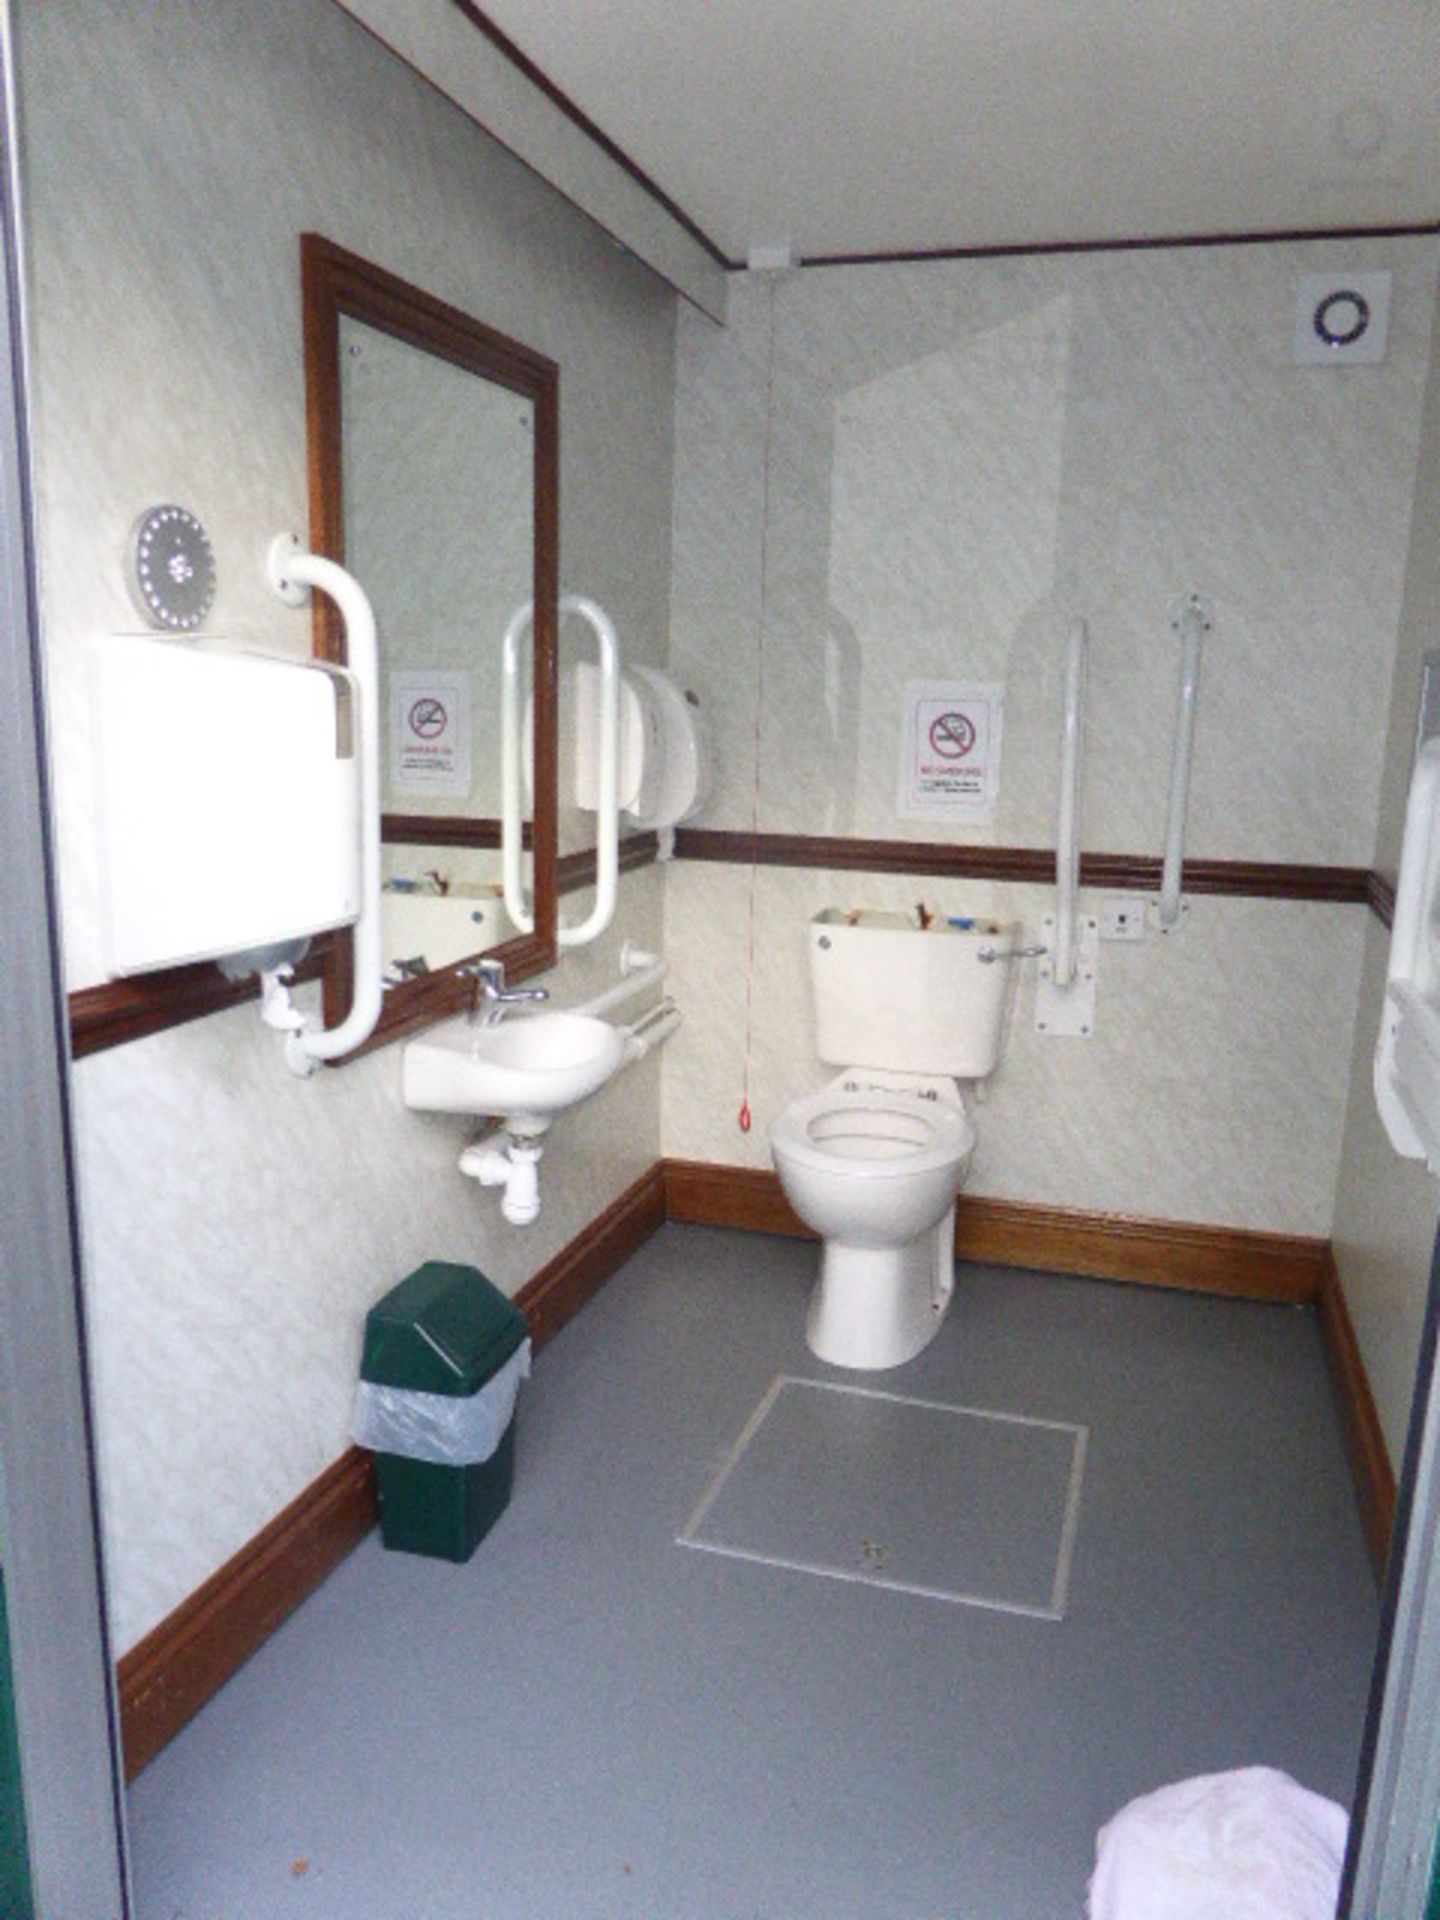 Disabled unisex luxury toilet with baby changing, access ramp and walk rails on single axle - Image 10 of 13